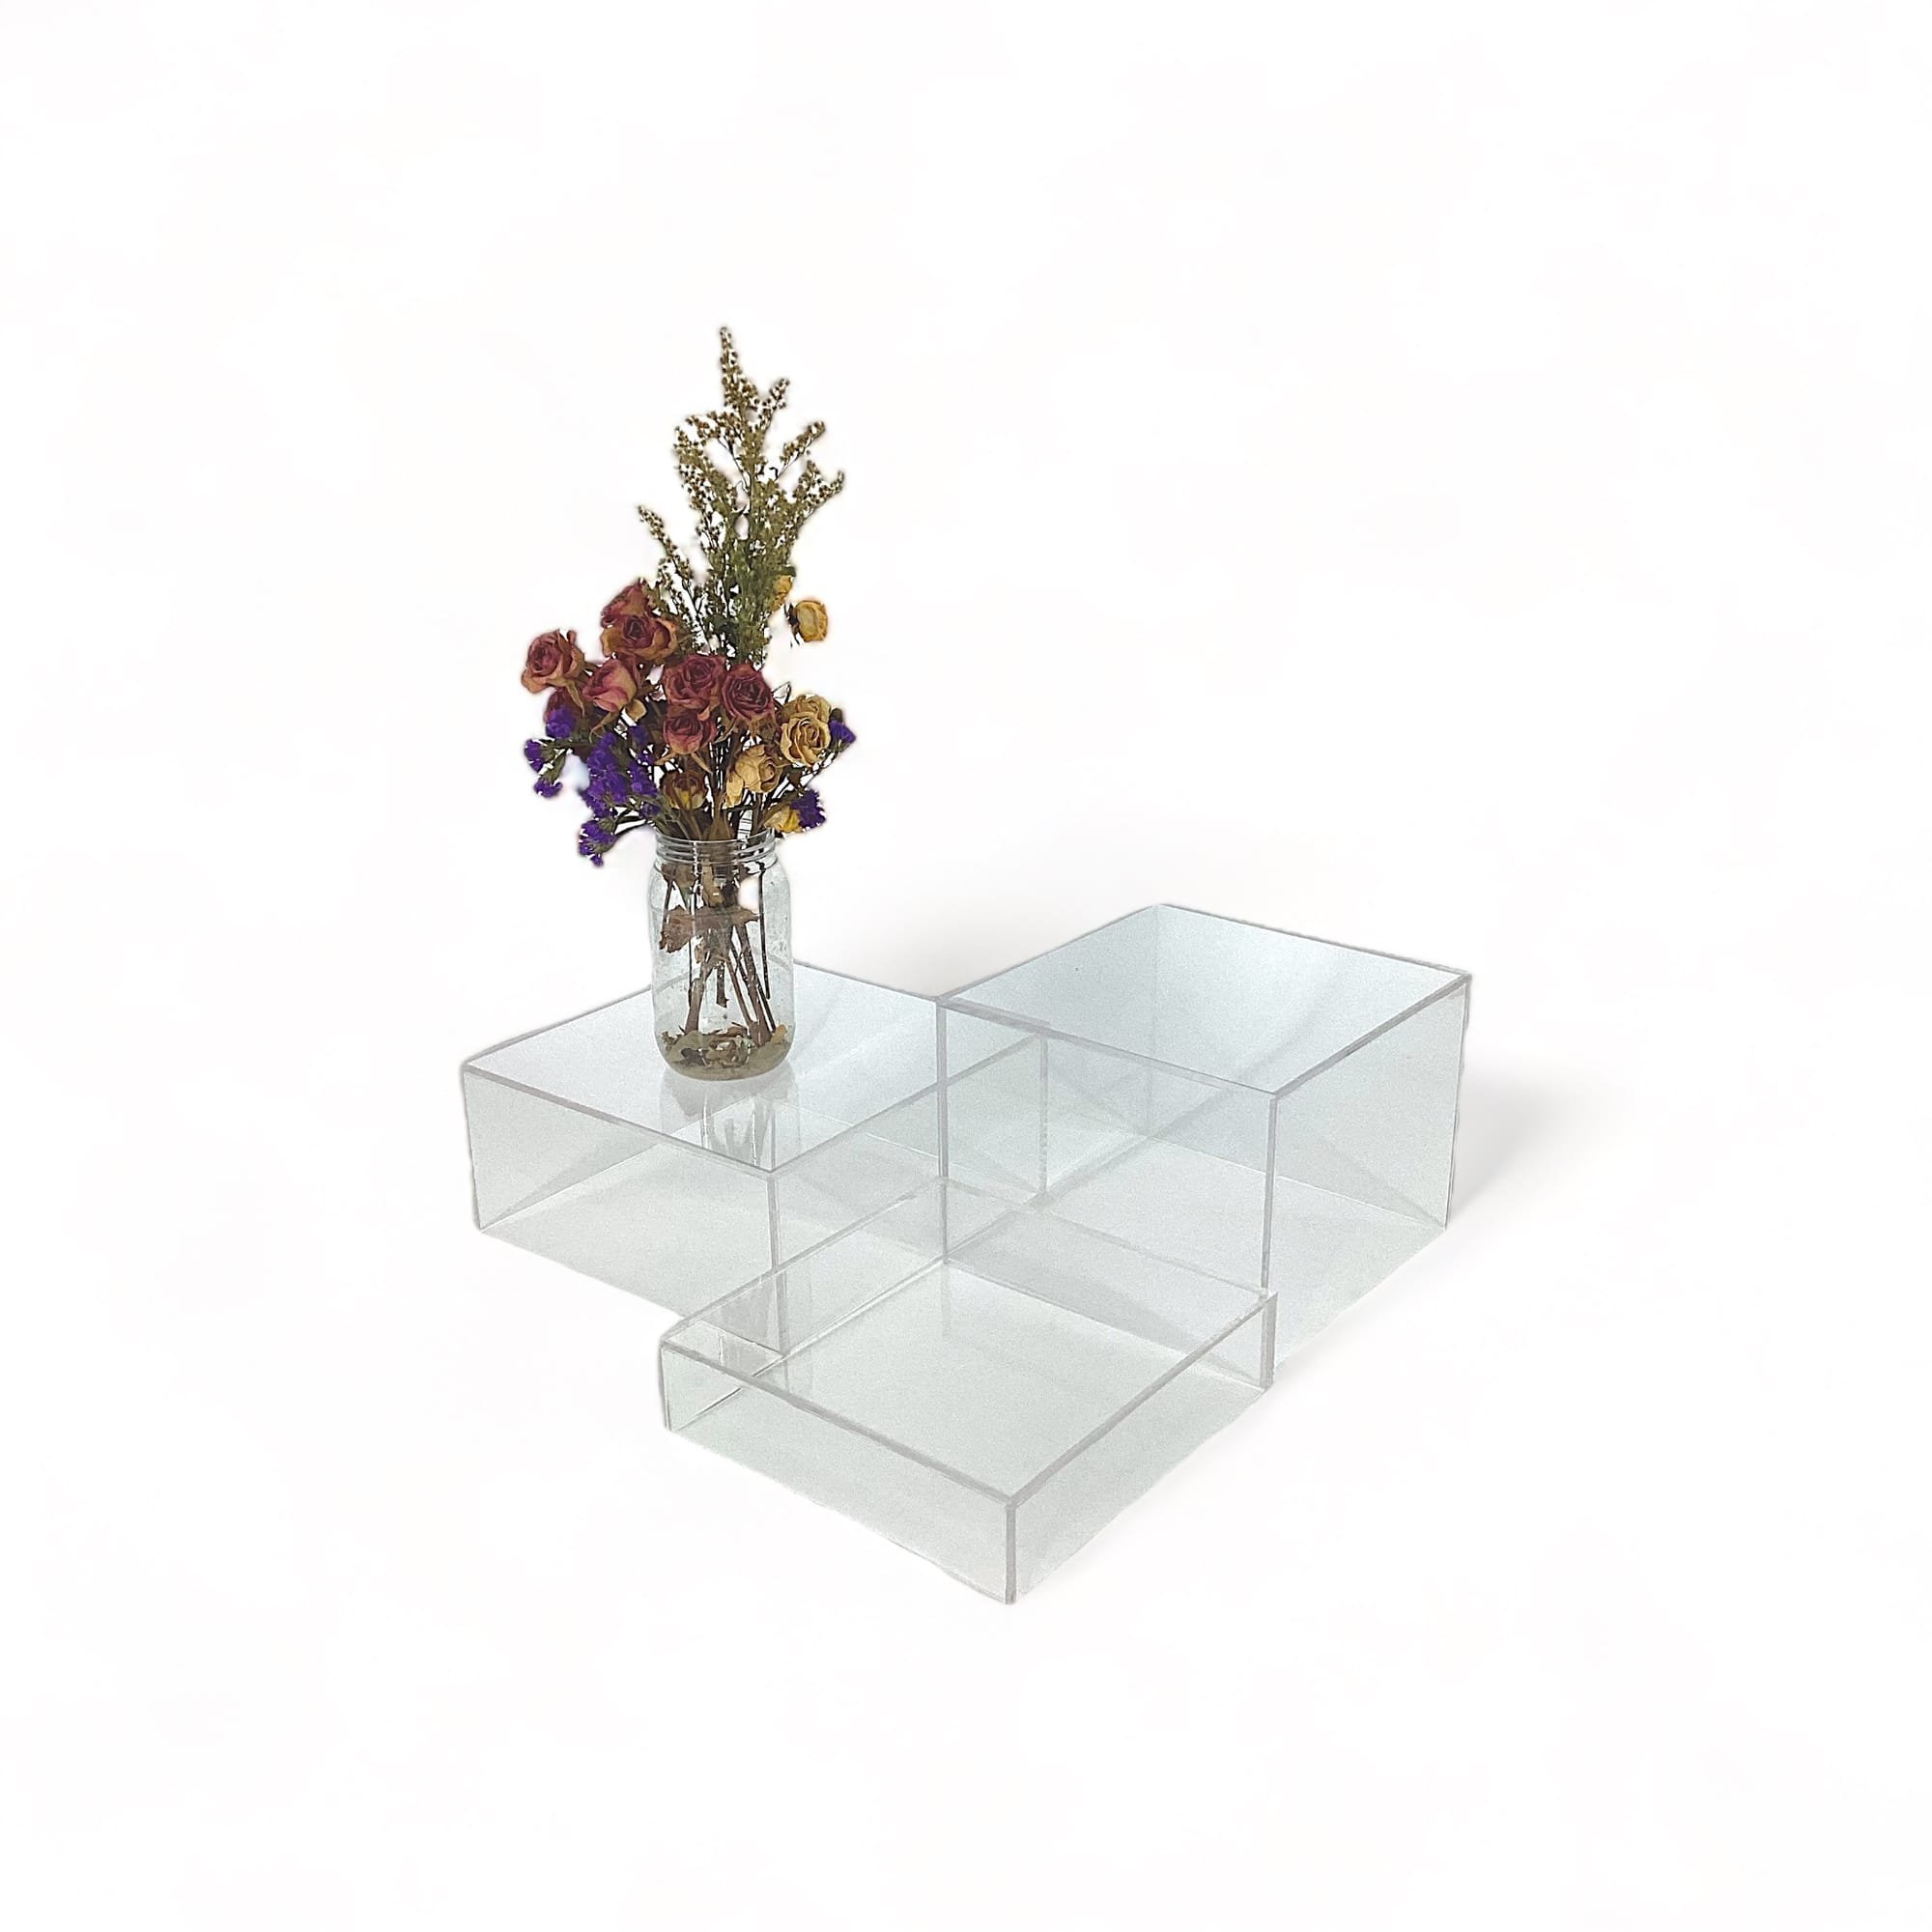 Using Mix-matched Clear Acrylic Risers to Create Intriguing Displays